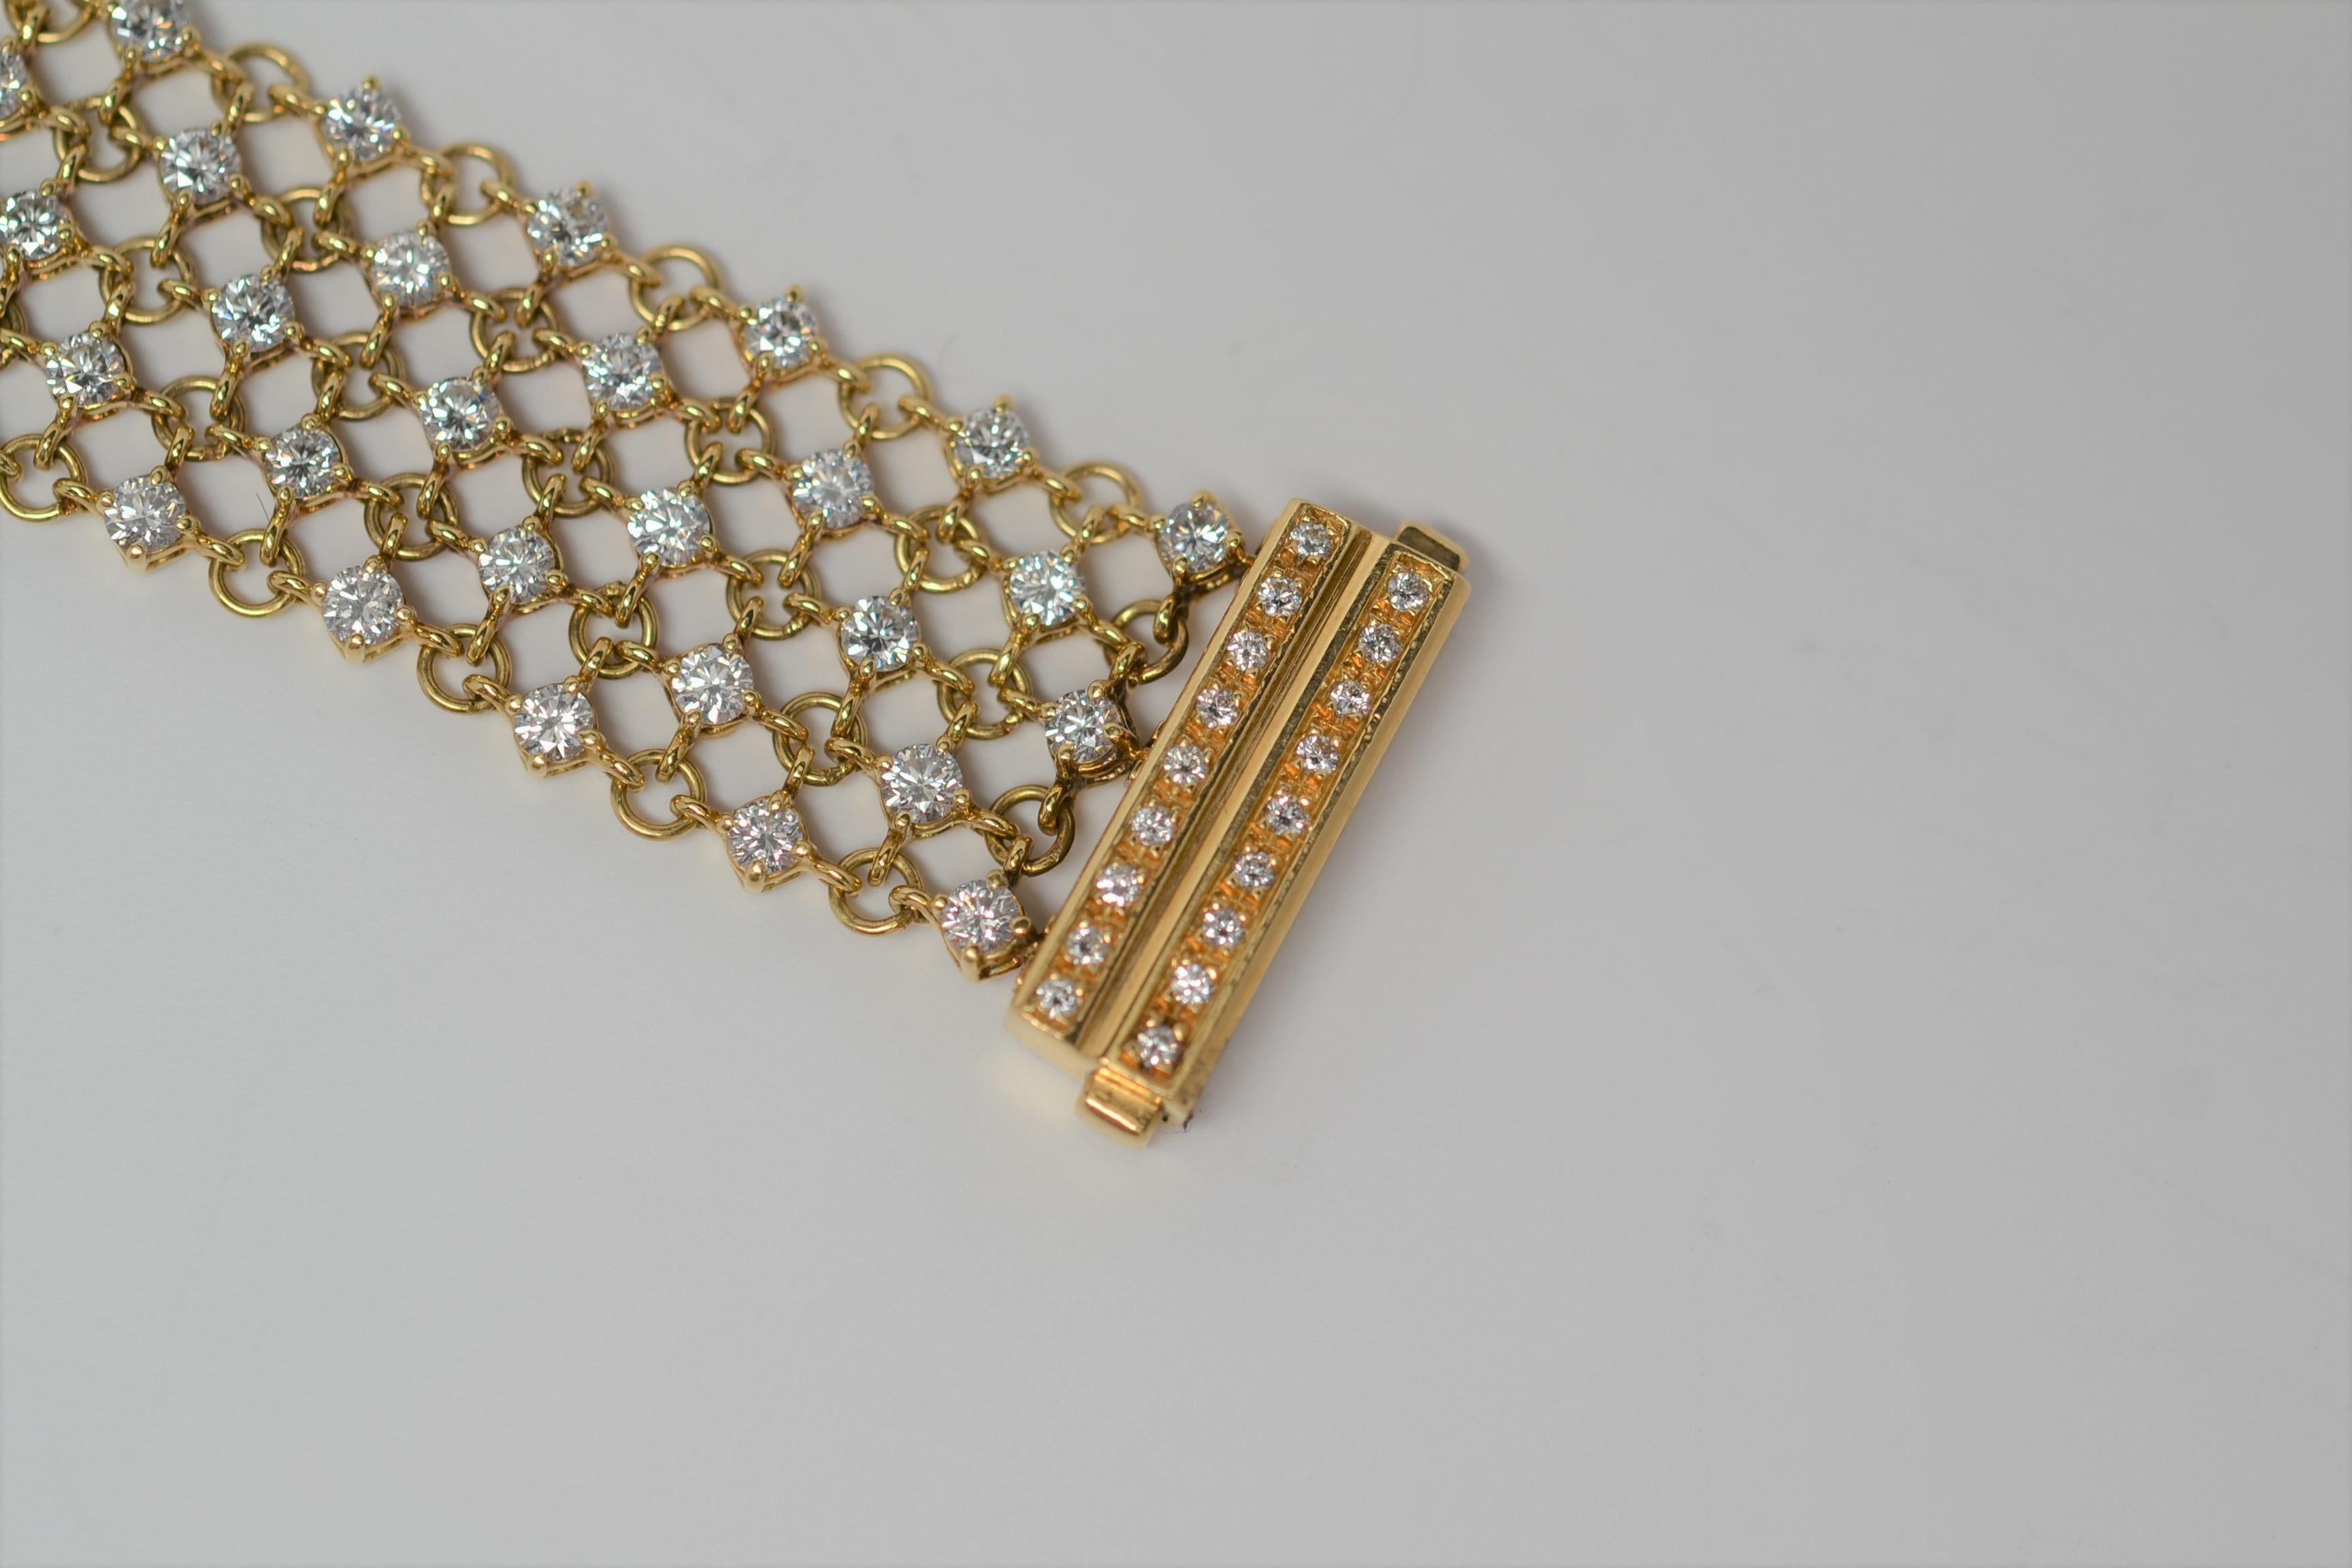 Diamond Mesh Link Bracelet with 8.12 Carats Set in 18k Yellow Gold For Sale 1